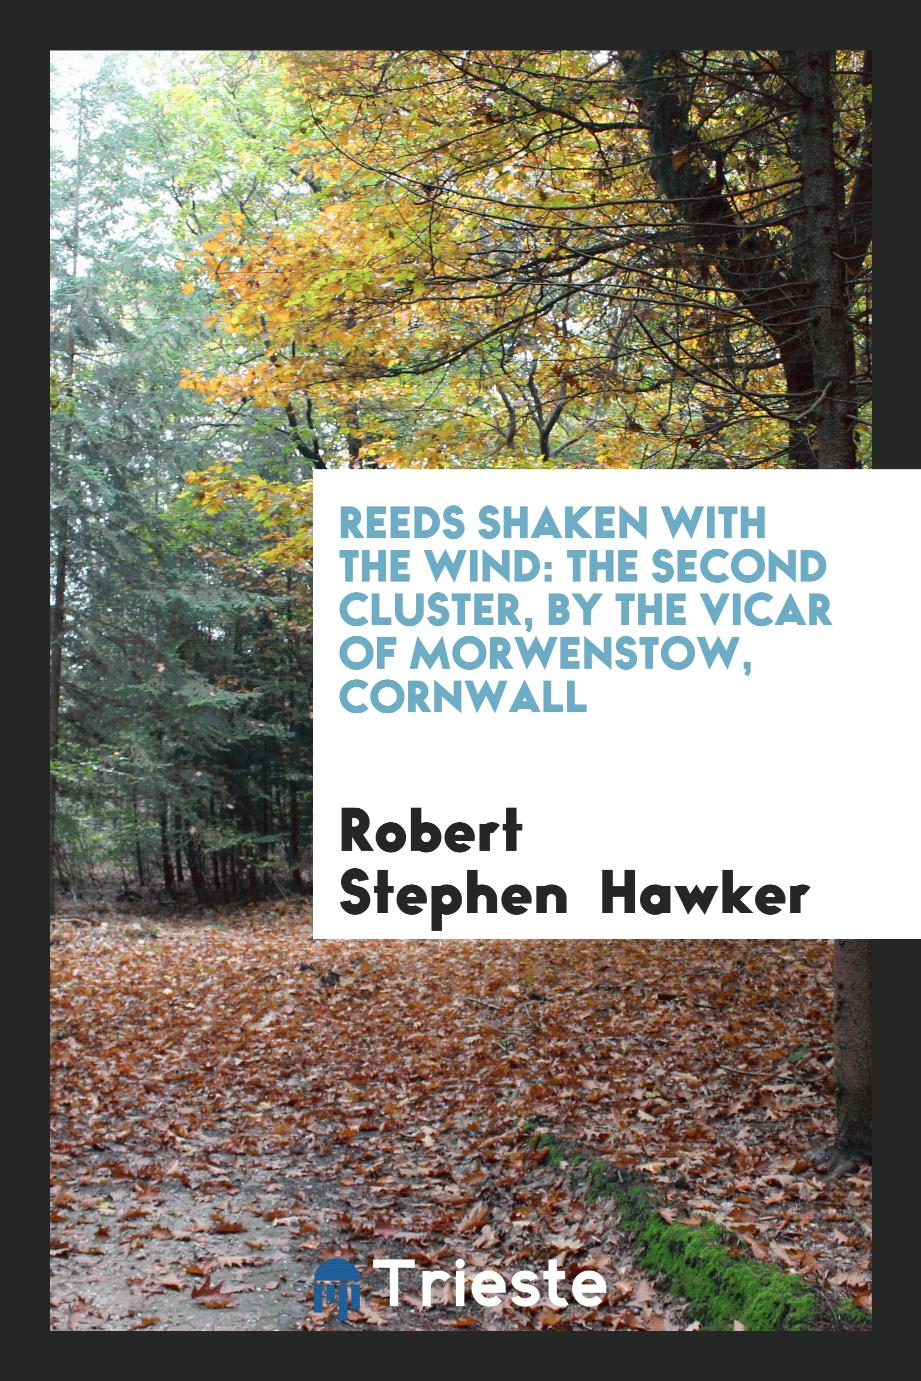 Reeds shaken with the wind: The second cluster, by the vicar of Morwenstow, Cornwall